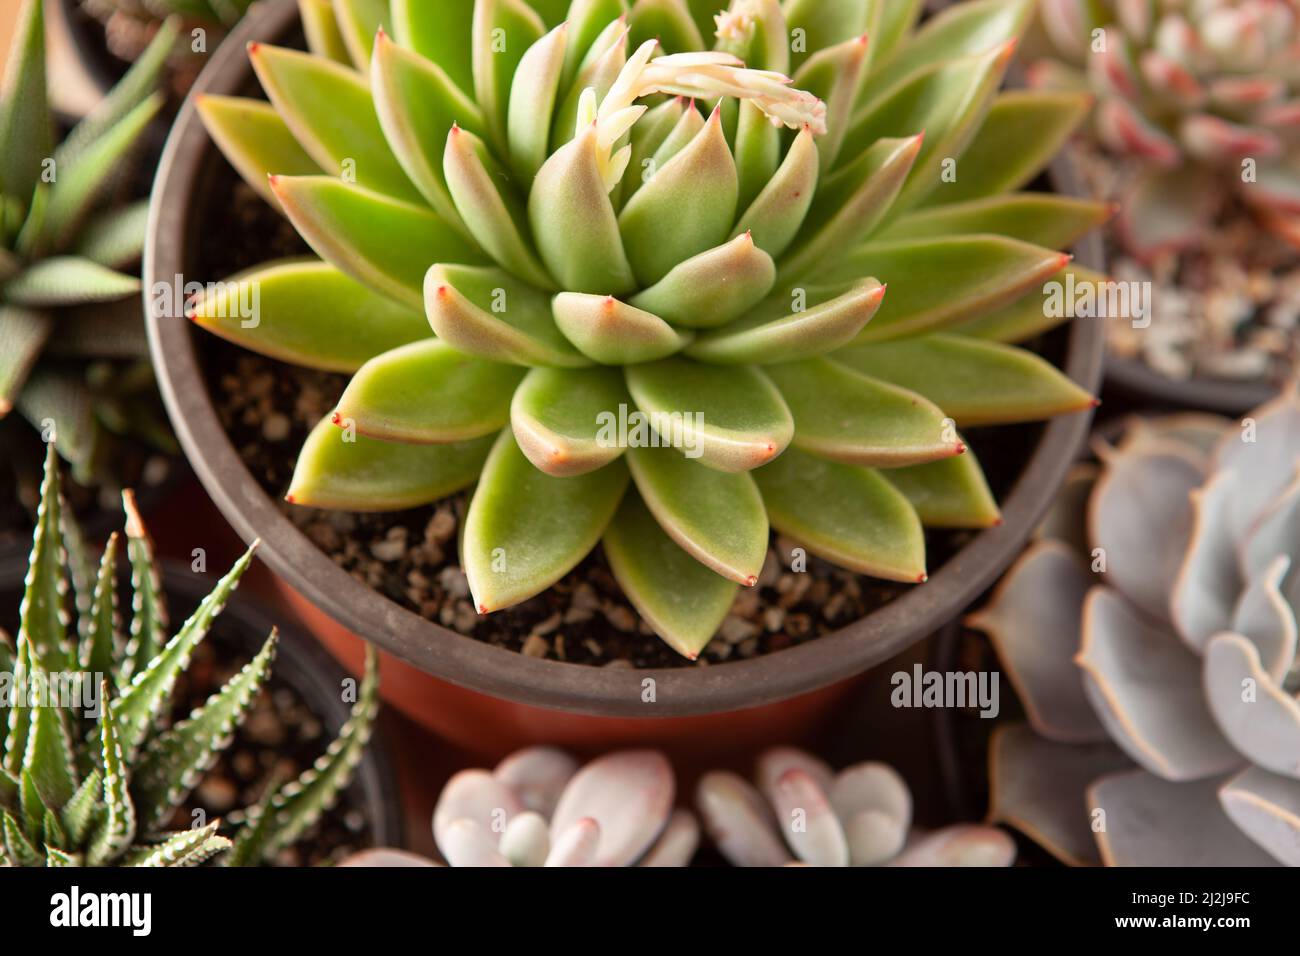 Succulents rosettes in pots, top view. Composition of colorful varieties of echeveria and haworthia plants. Succulent background for post, screensaver Stock Photo